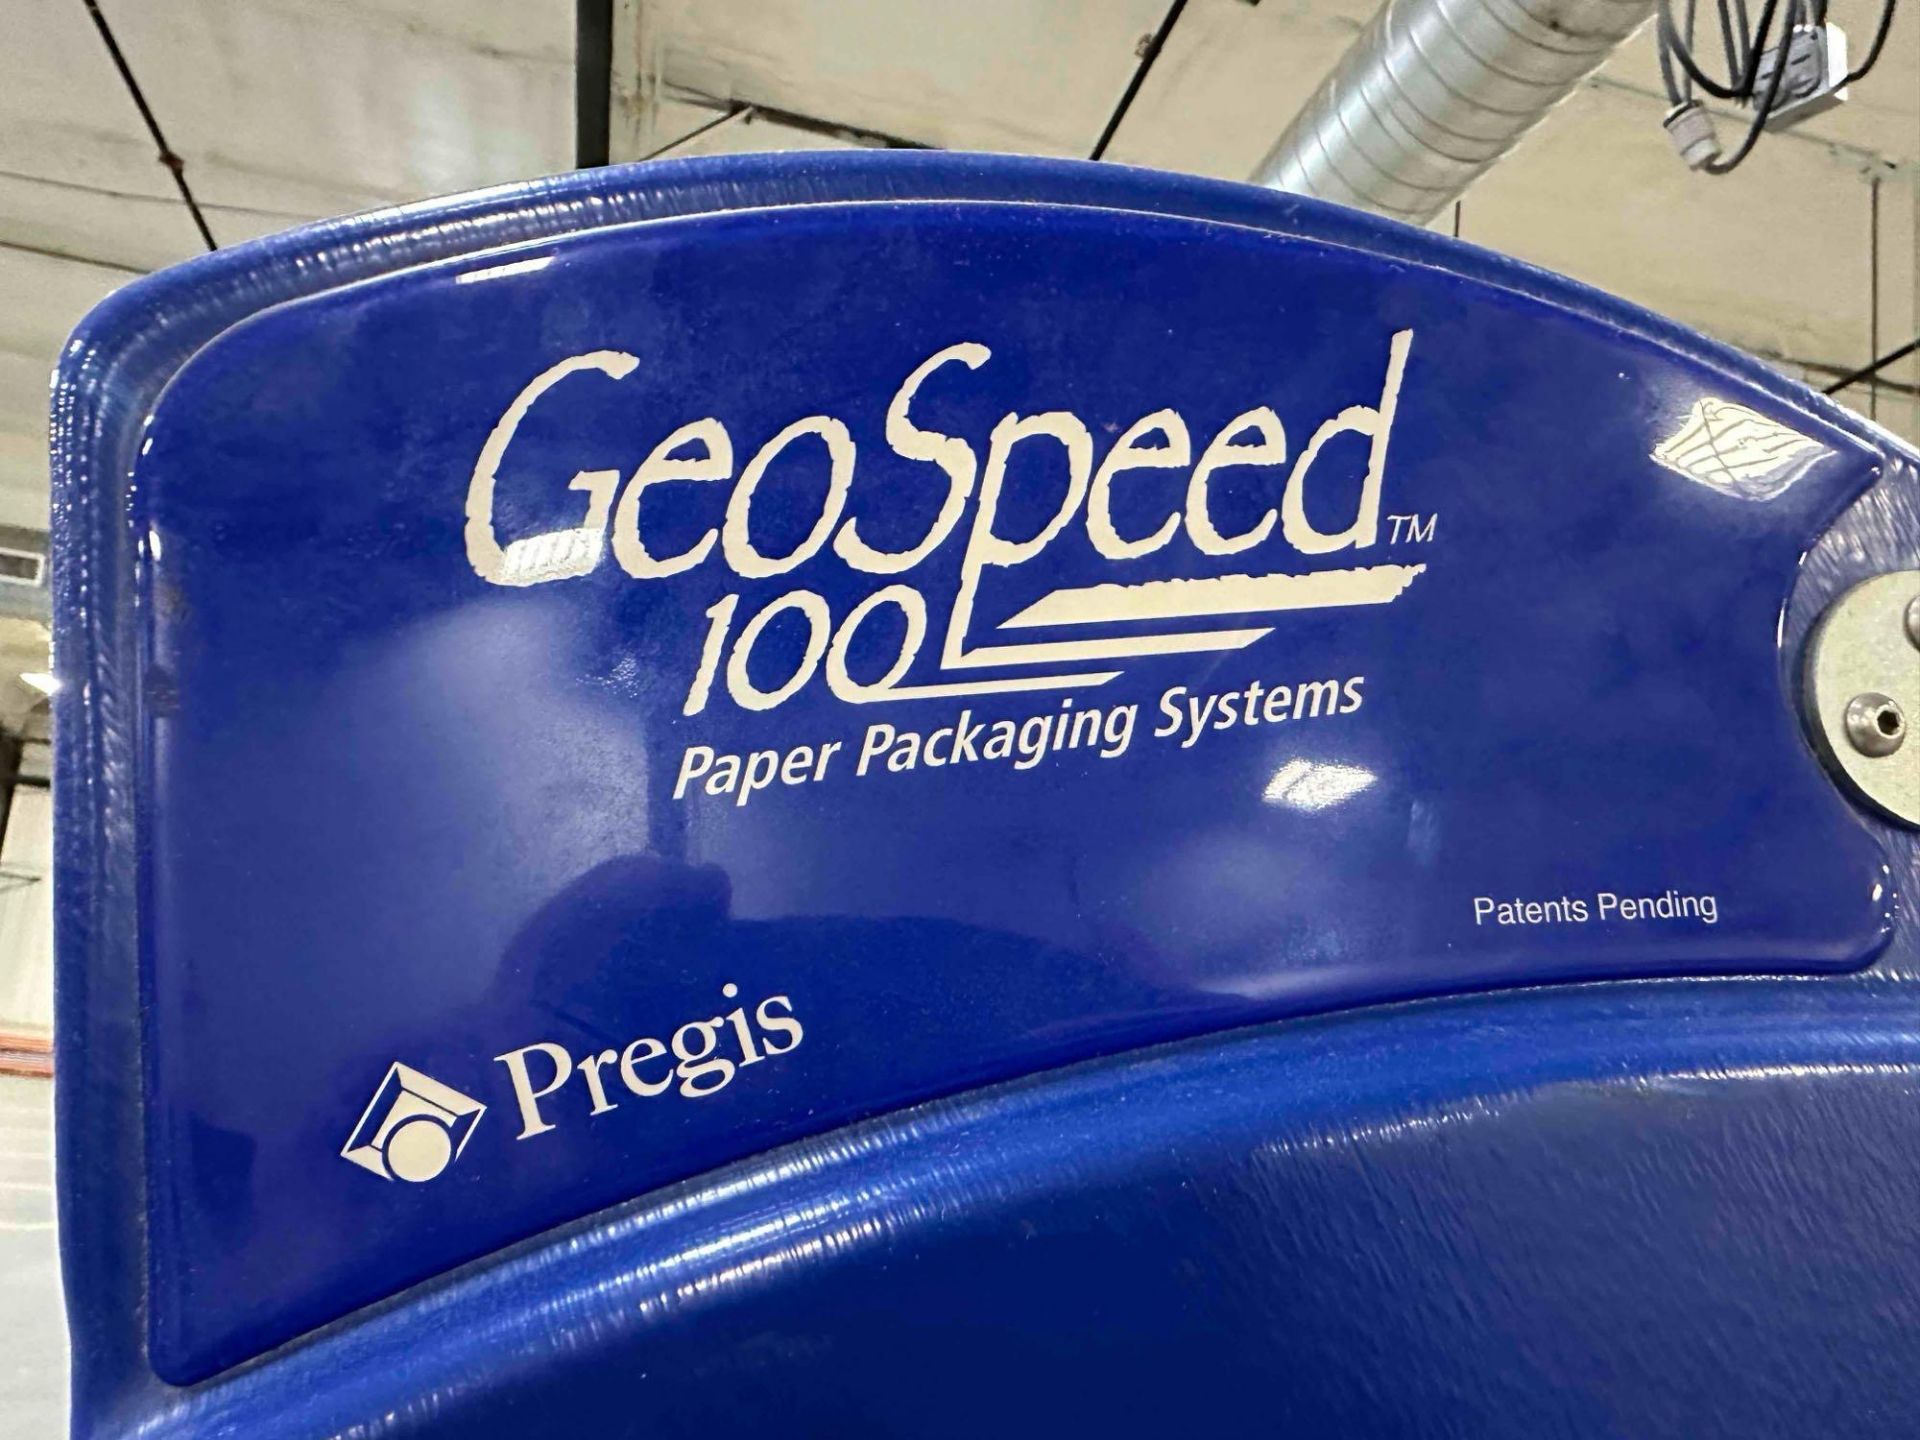 GeoSpeed 100 Paper Packaging Systems - Image 6 of 7